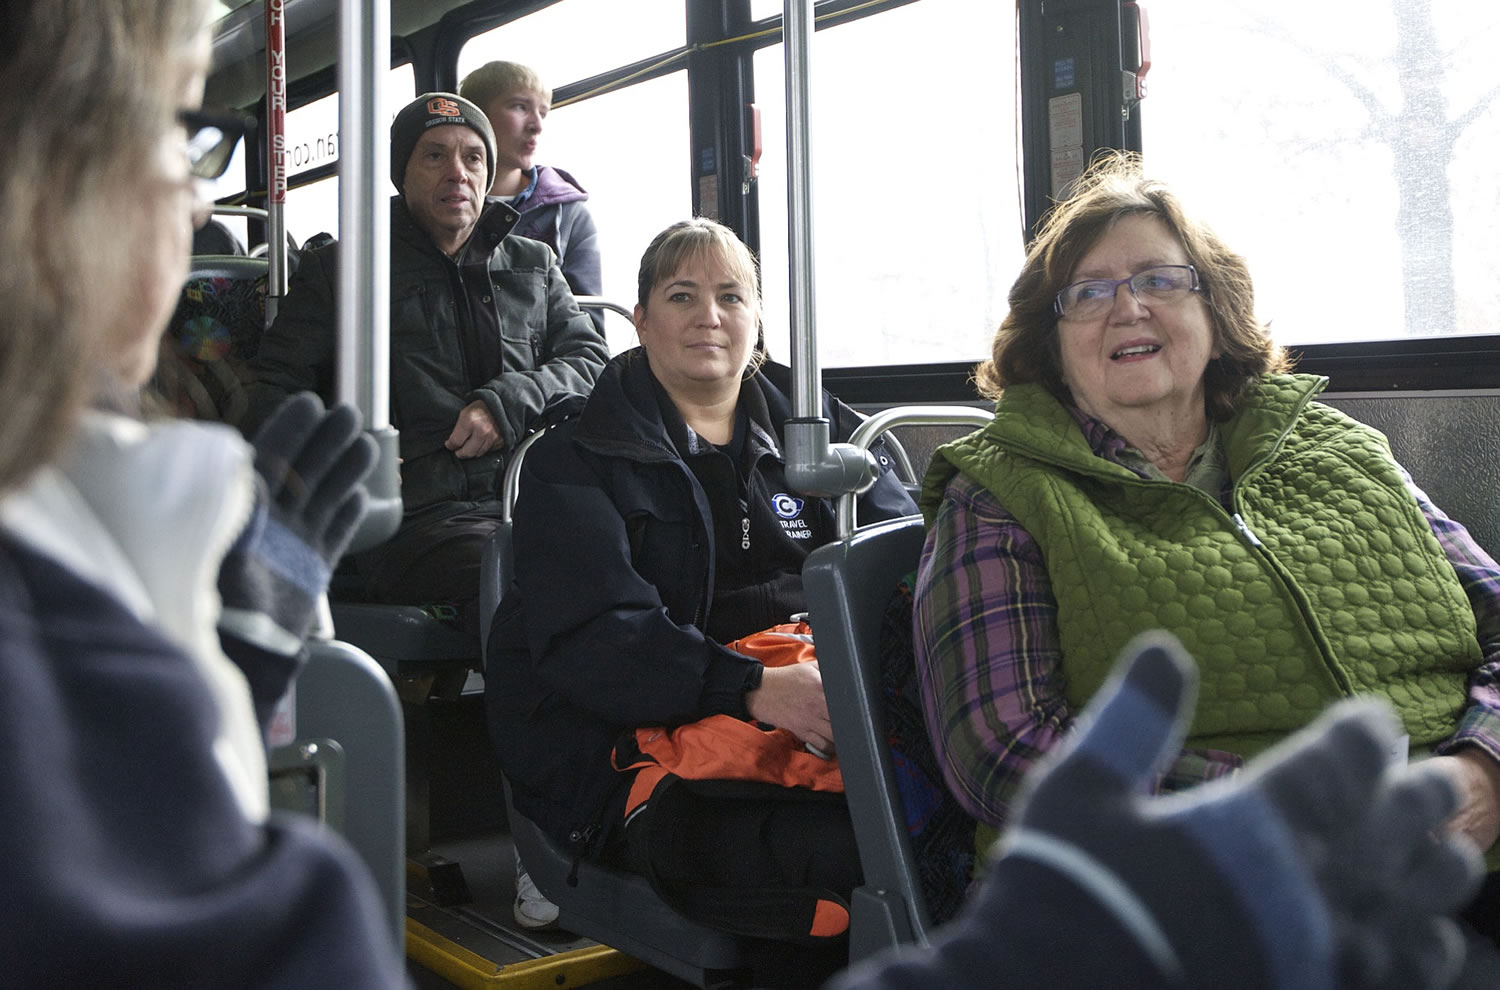 Clark County newcomer Wendy Olmstead, right, receives guidance from C-Tran travel ambassador Virginia Edwards, front left, during a recent trip from Camas to the Westfield Vancouver mall.